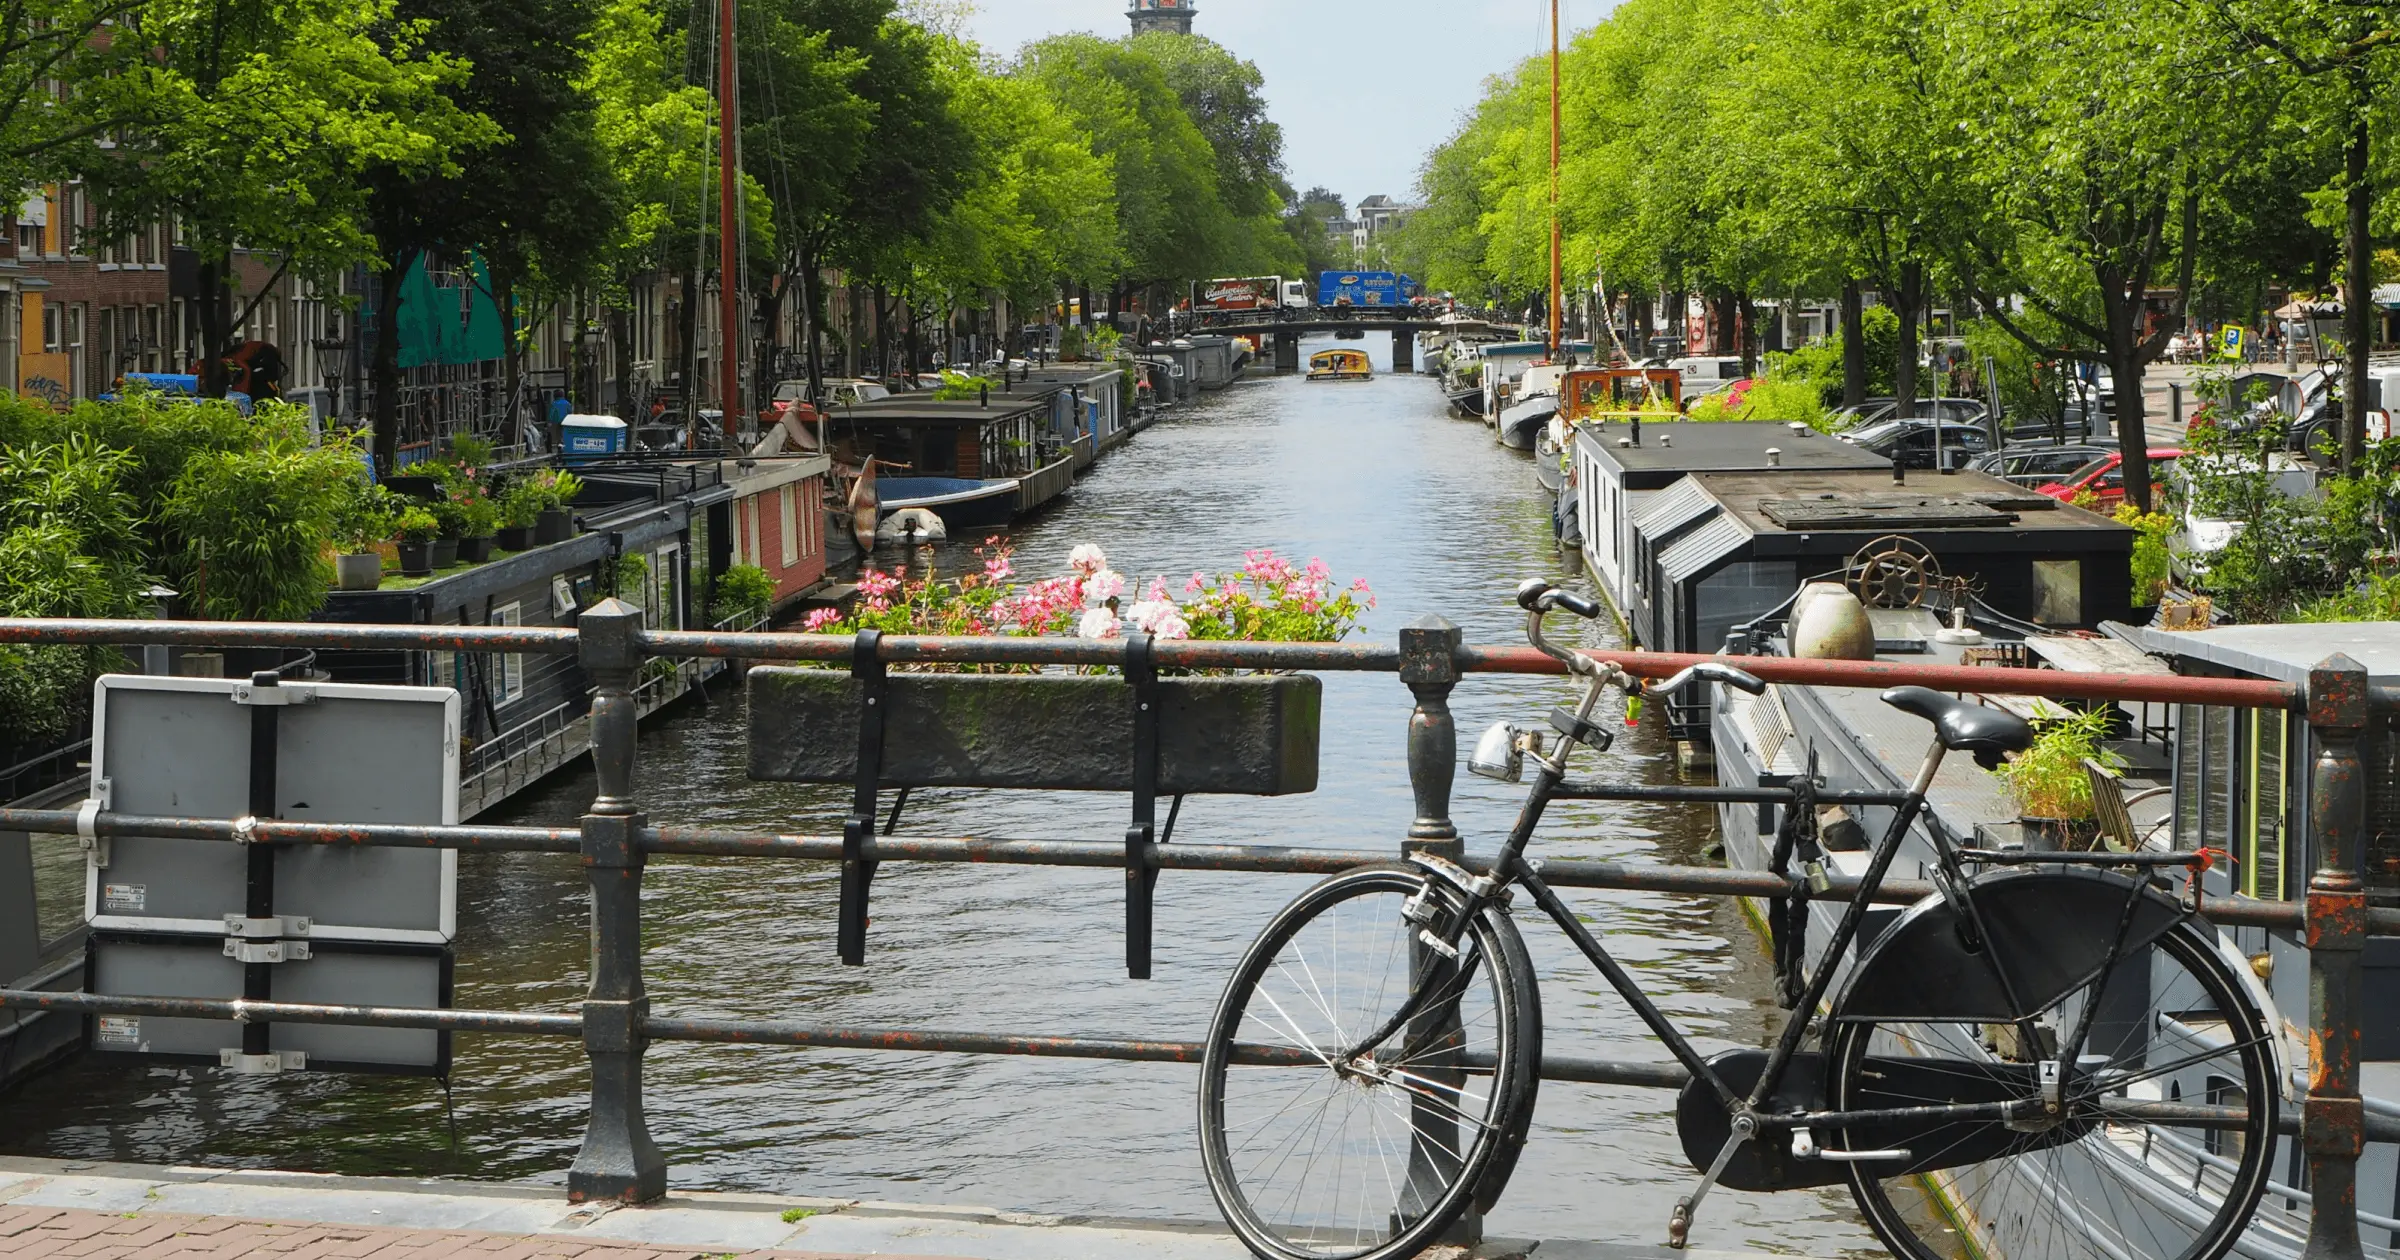 All you need to know about living in the Netherlands as an expat